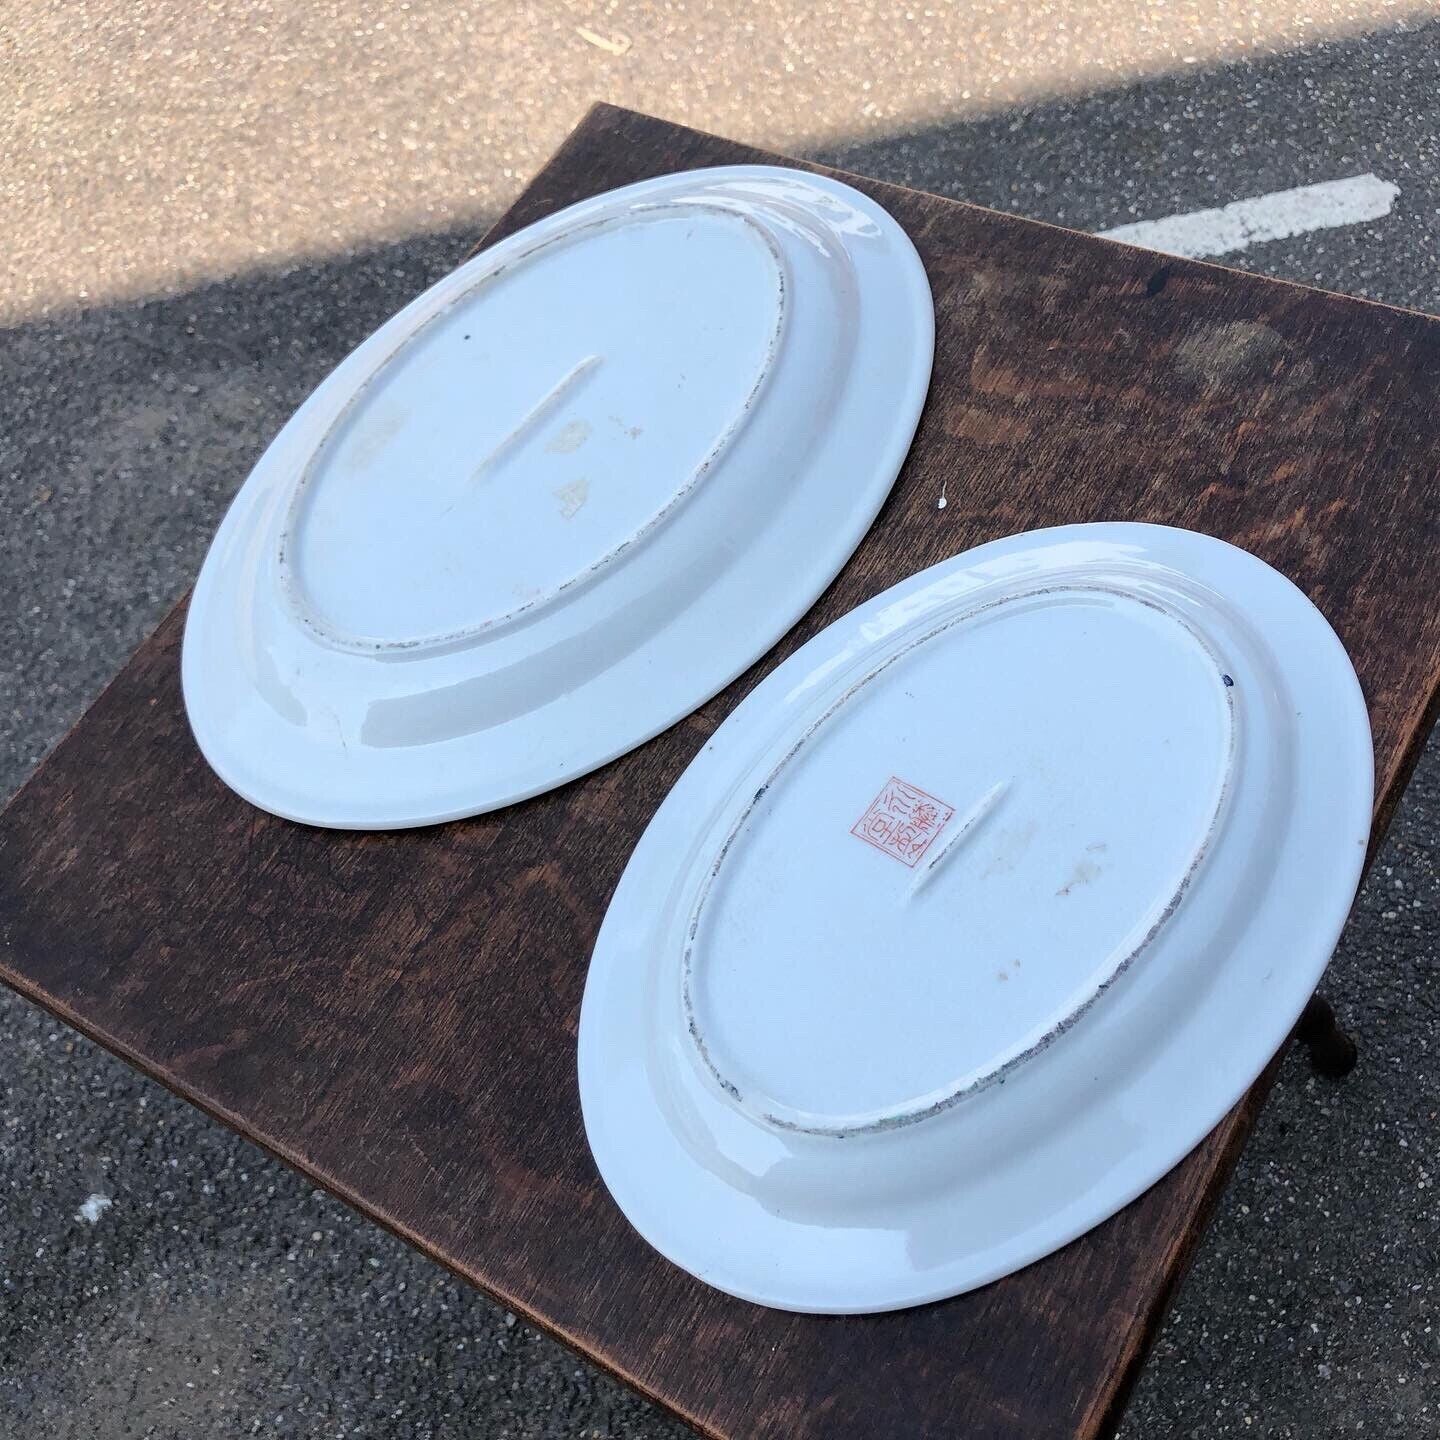 Set Of 3 Exhibition Plates And Matching Bowl.